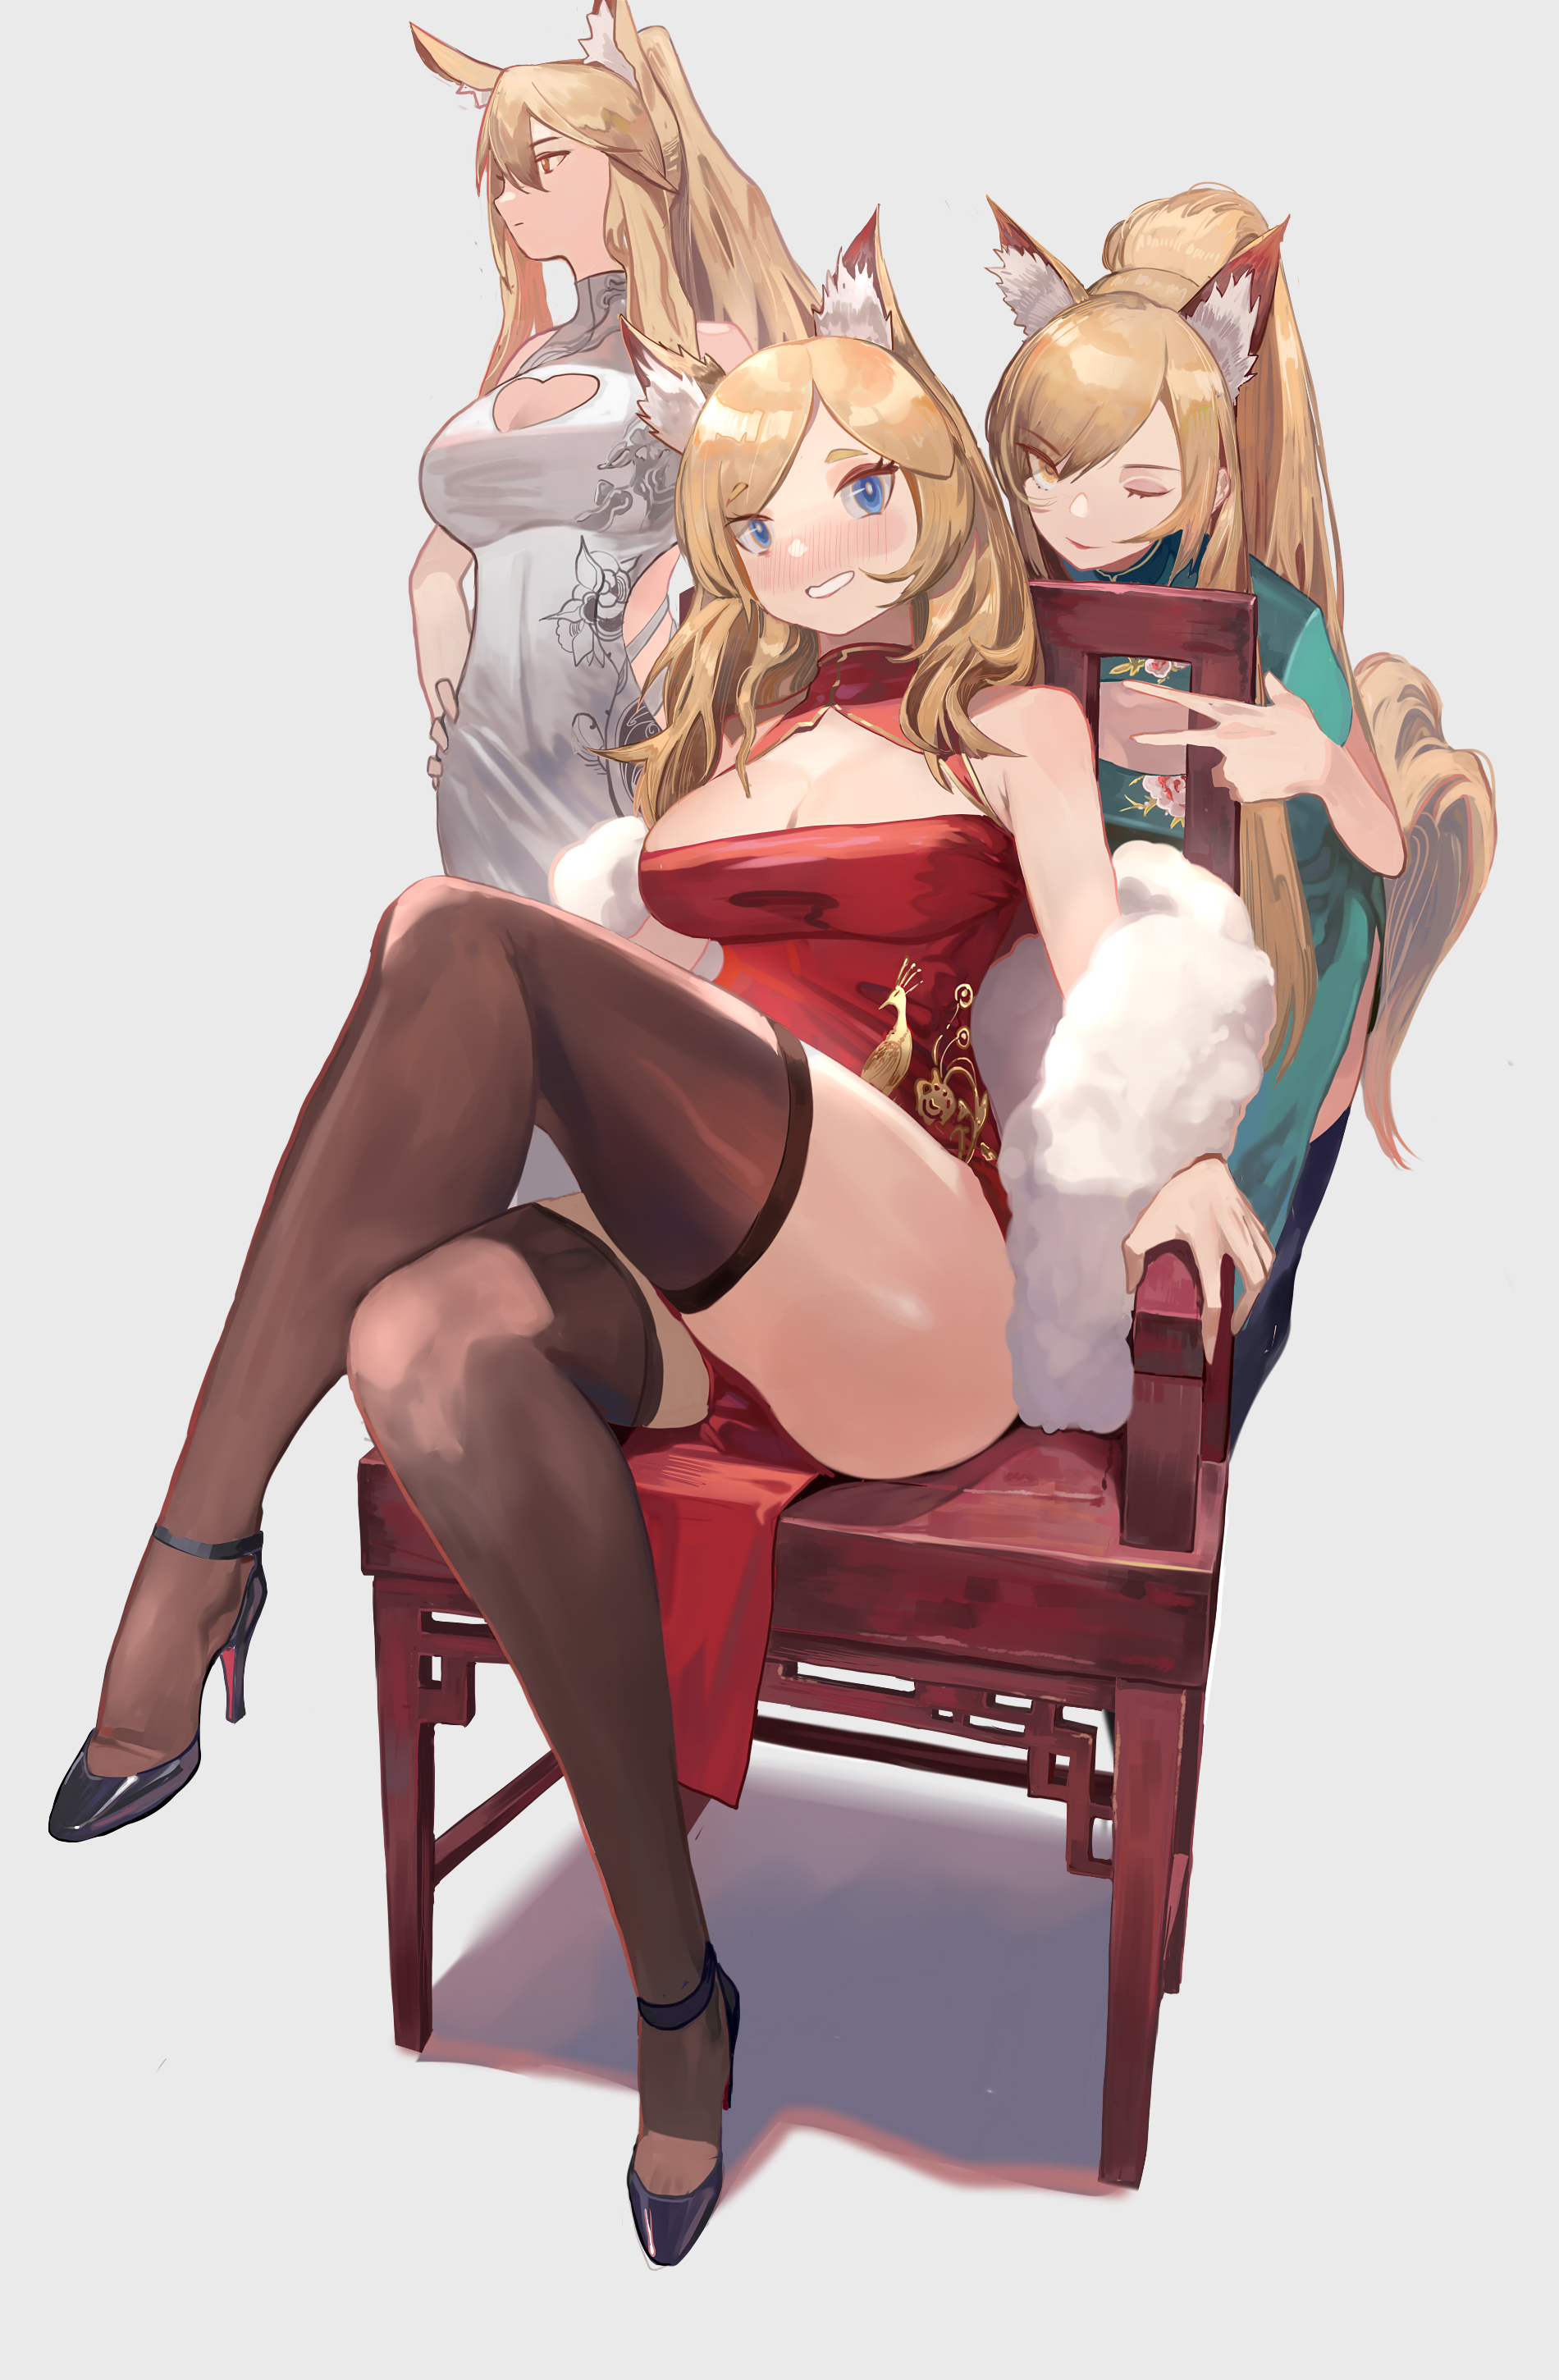 blonde, Vic, cleavage, thick thigh, anime, anime girls, simple